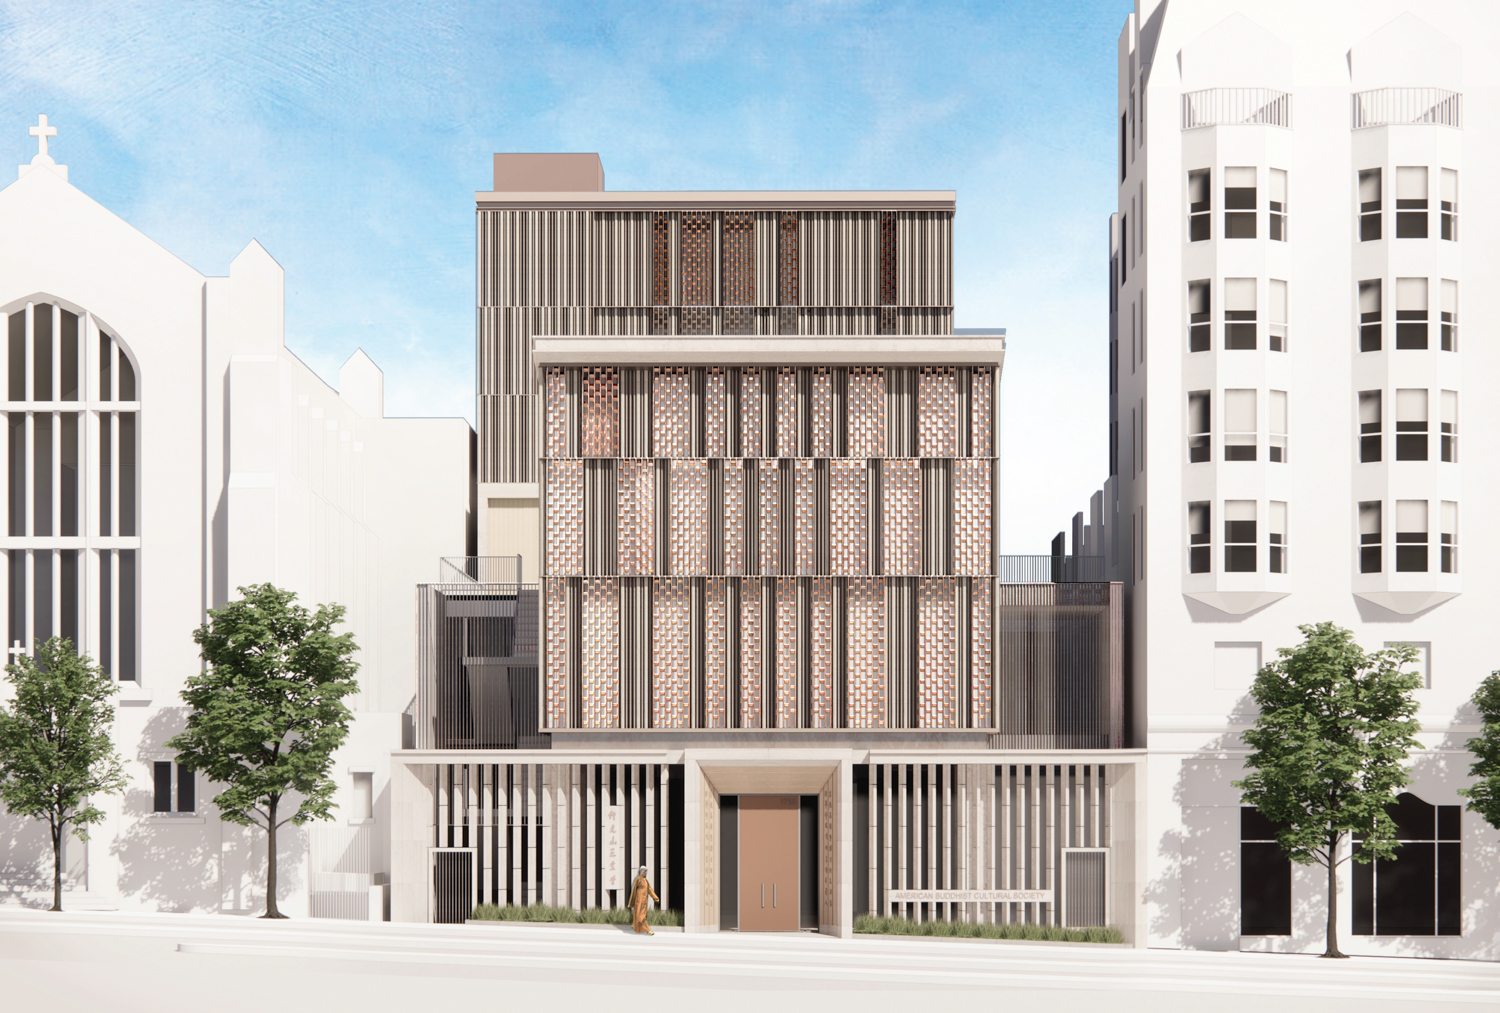 The new American Buddhist Cultural Society rendering for 1750 Van Ness Avenue, design by Skidmore, Owings & Merrill